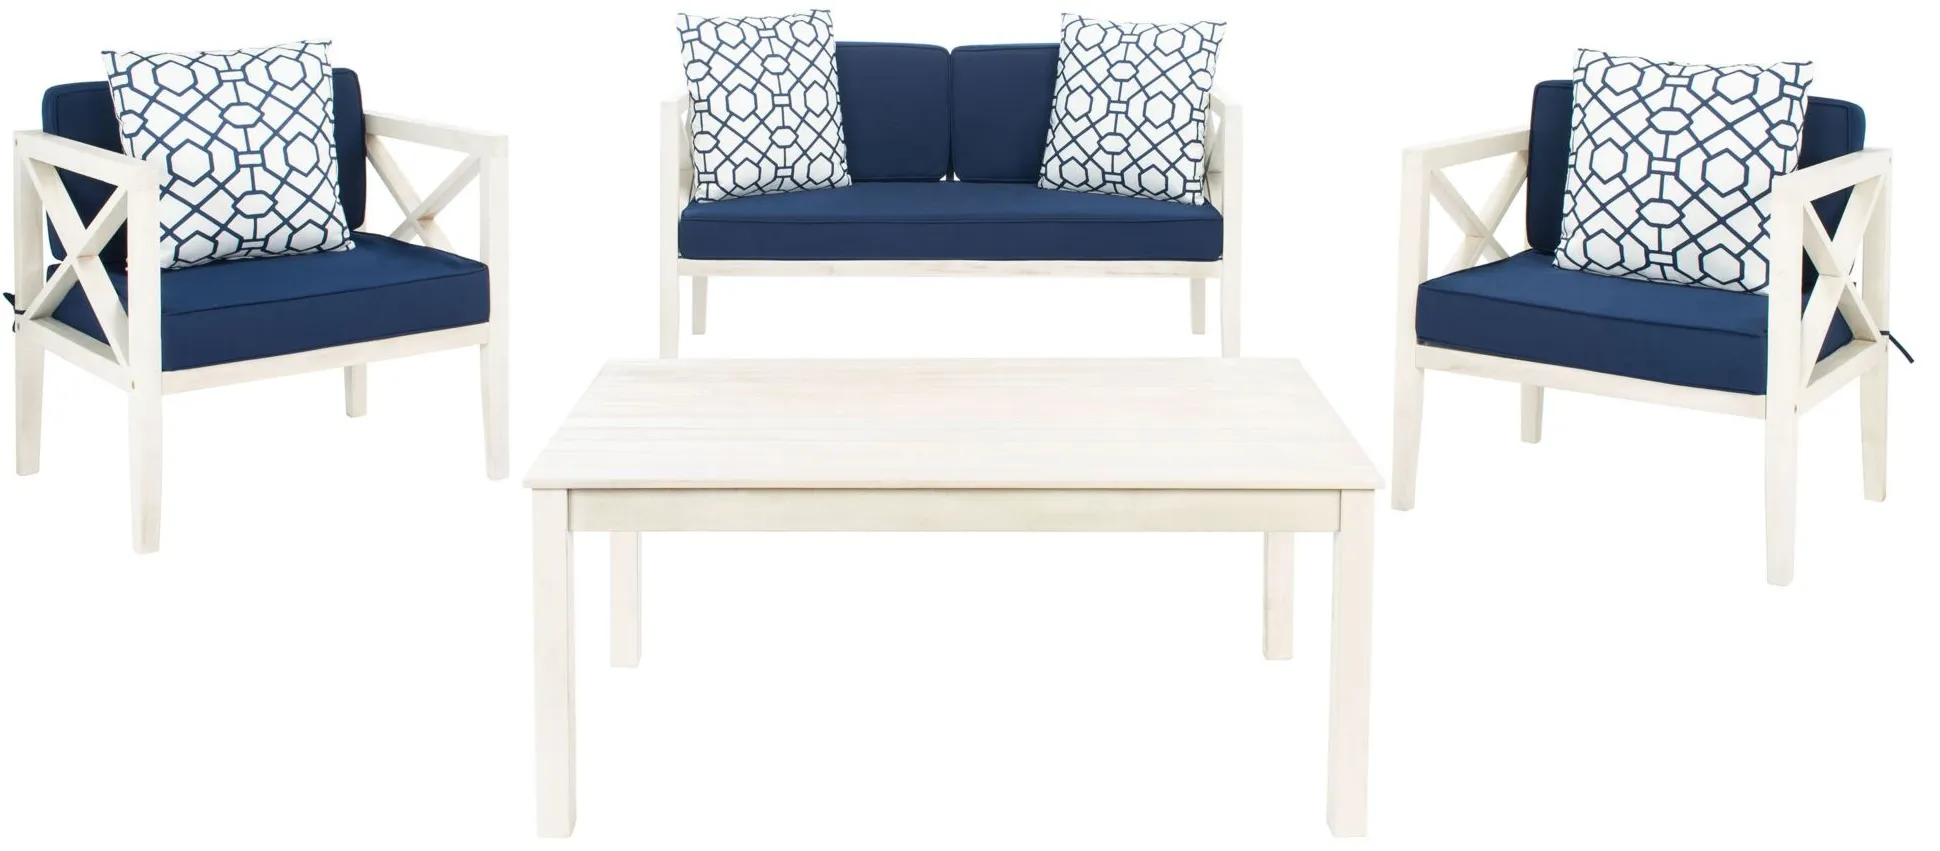 Indria 4-pc. Patio Set in Pacific Blue by Safavieh